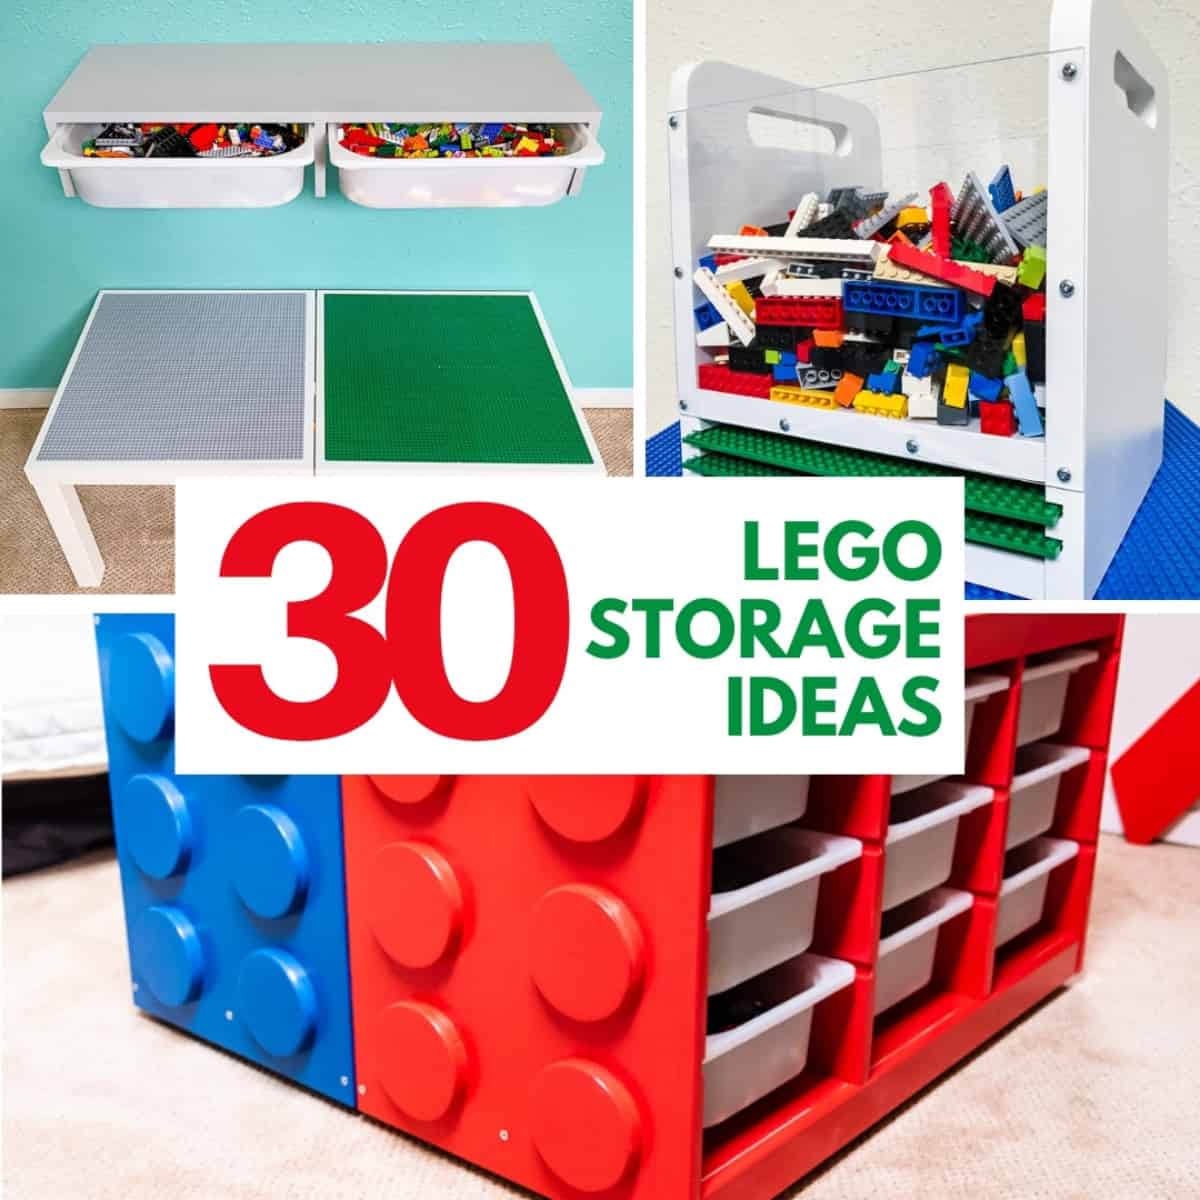 44 Space-Saving Toy Storage Ideas for the Kids' Room